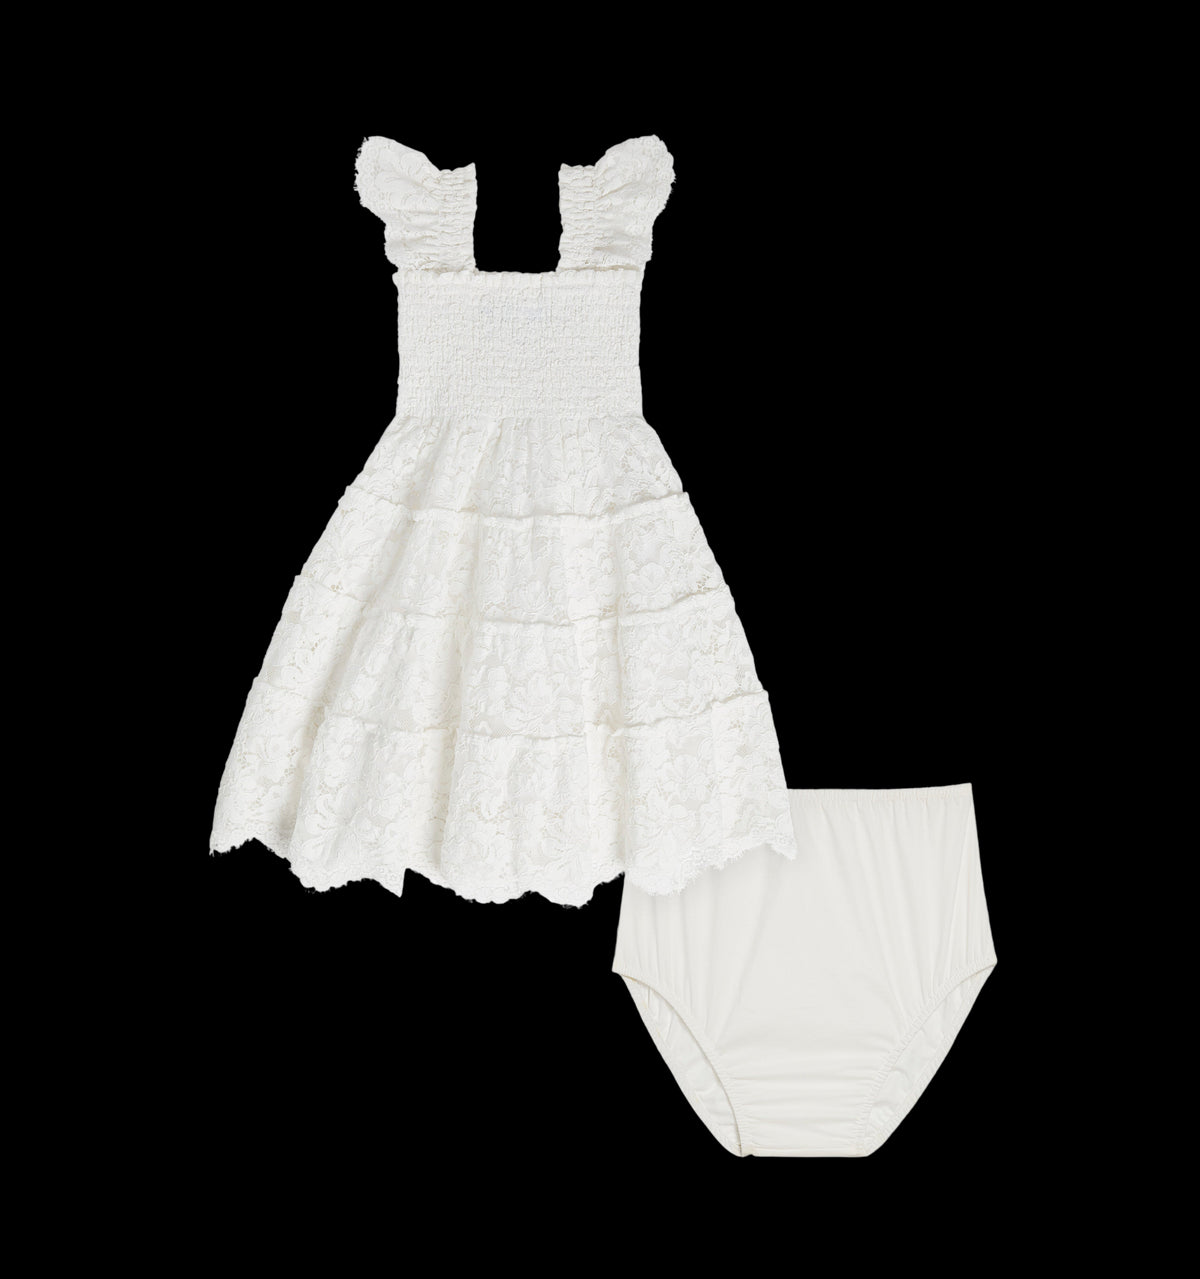 The Baby Lace Ellie Nap Dress in White Lace